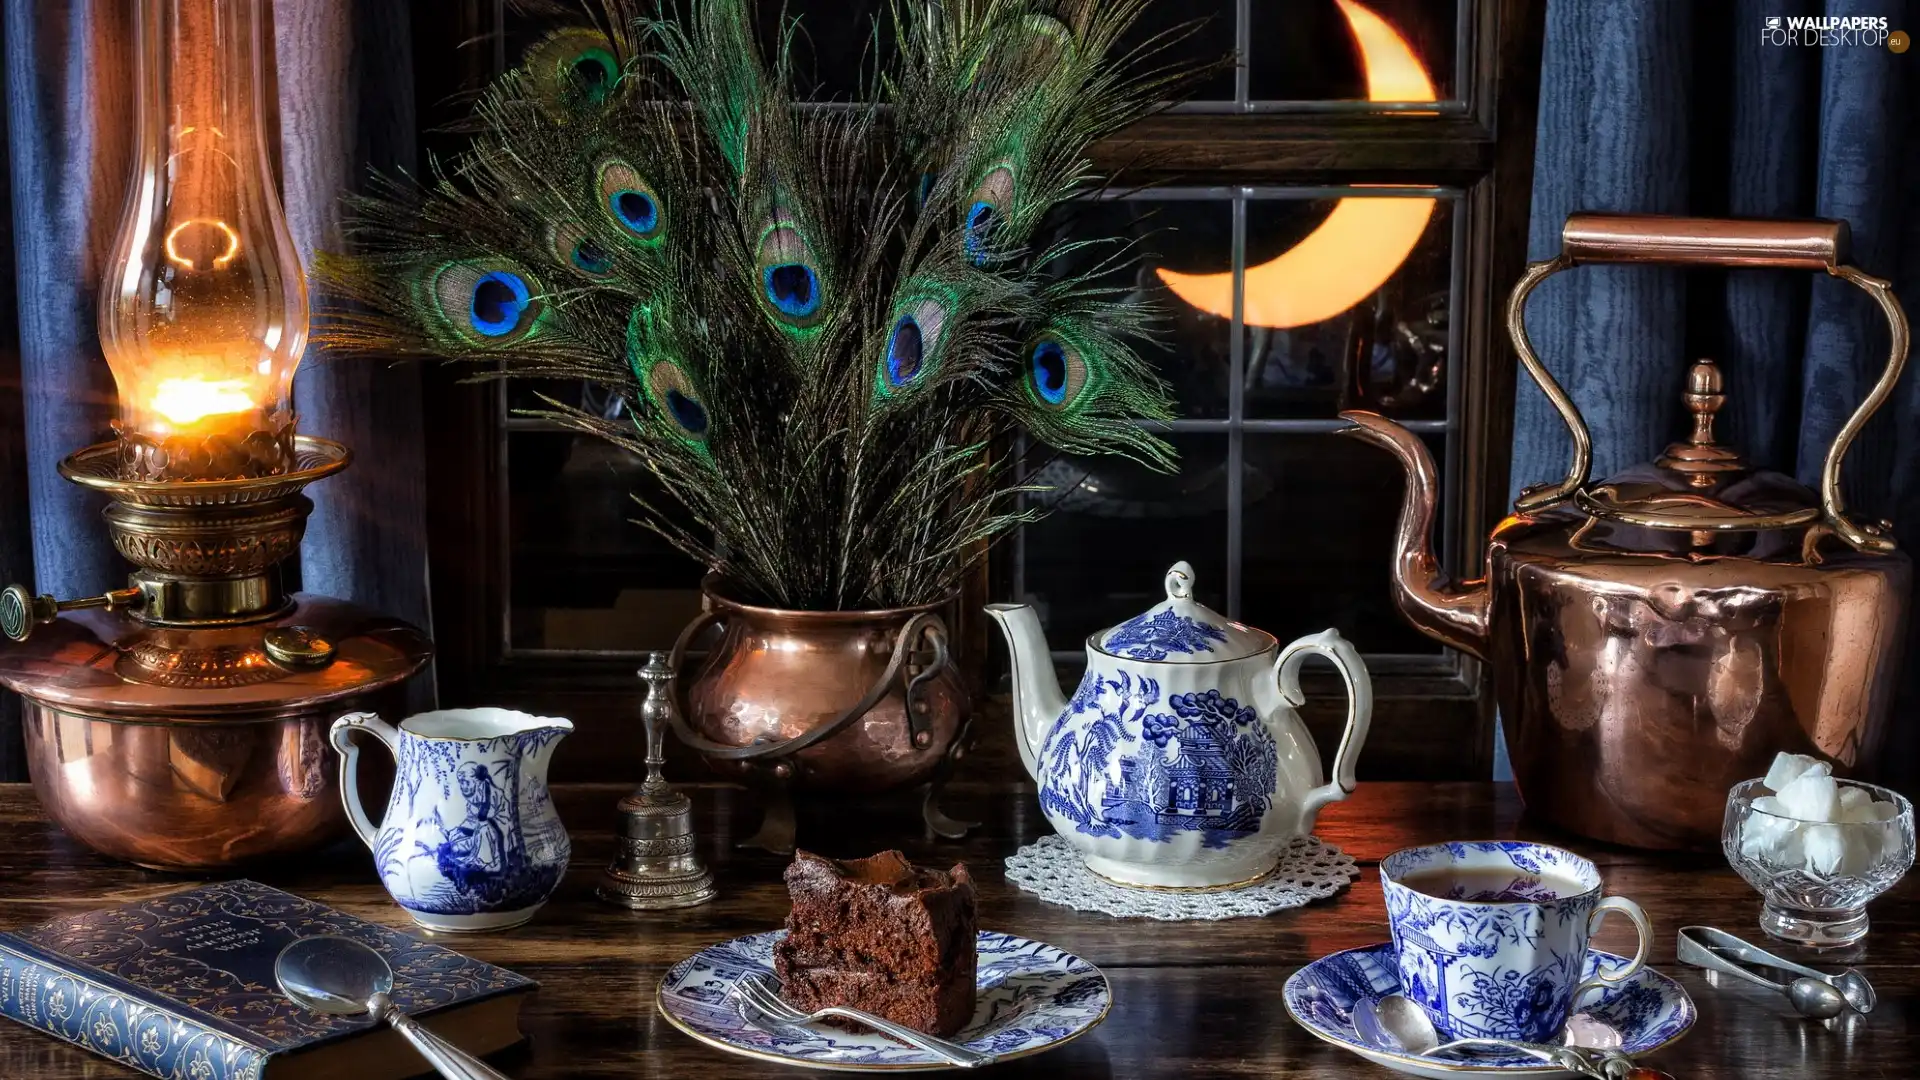 Window, kettle, kettle, composition, cup, feather, cake, Book, Oil Lamp, Creamer, service, porcelain, peacocks, moon